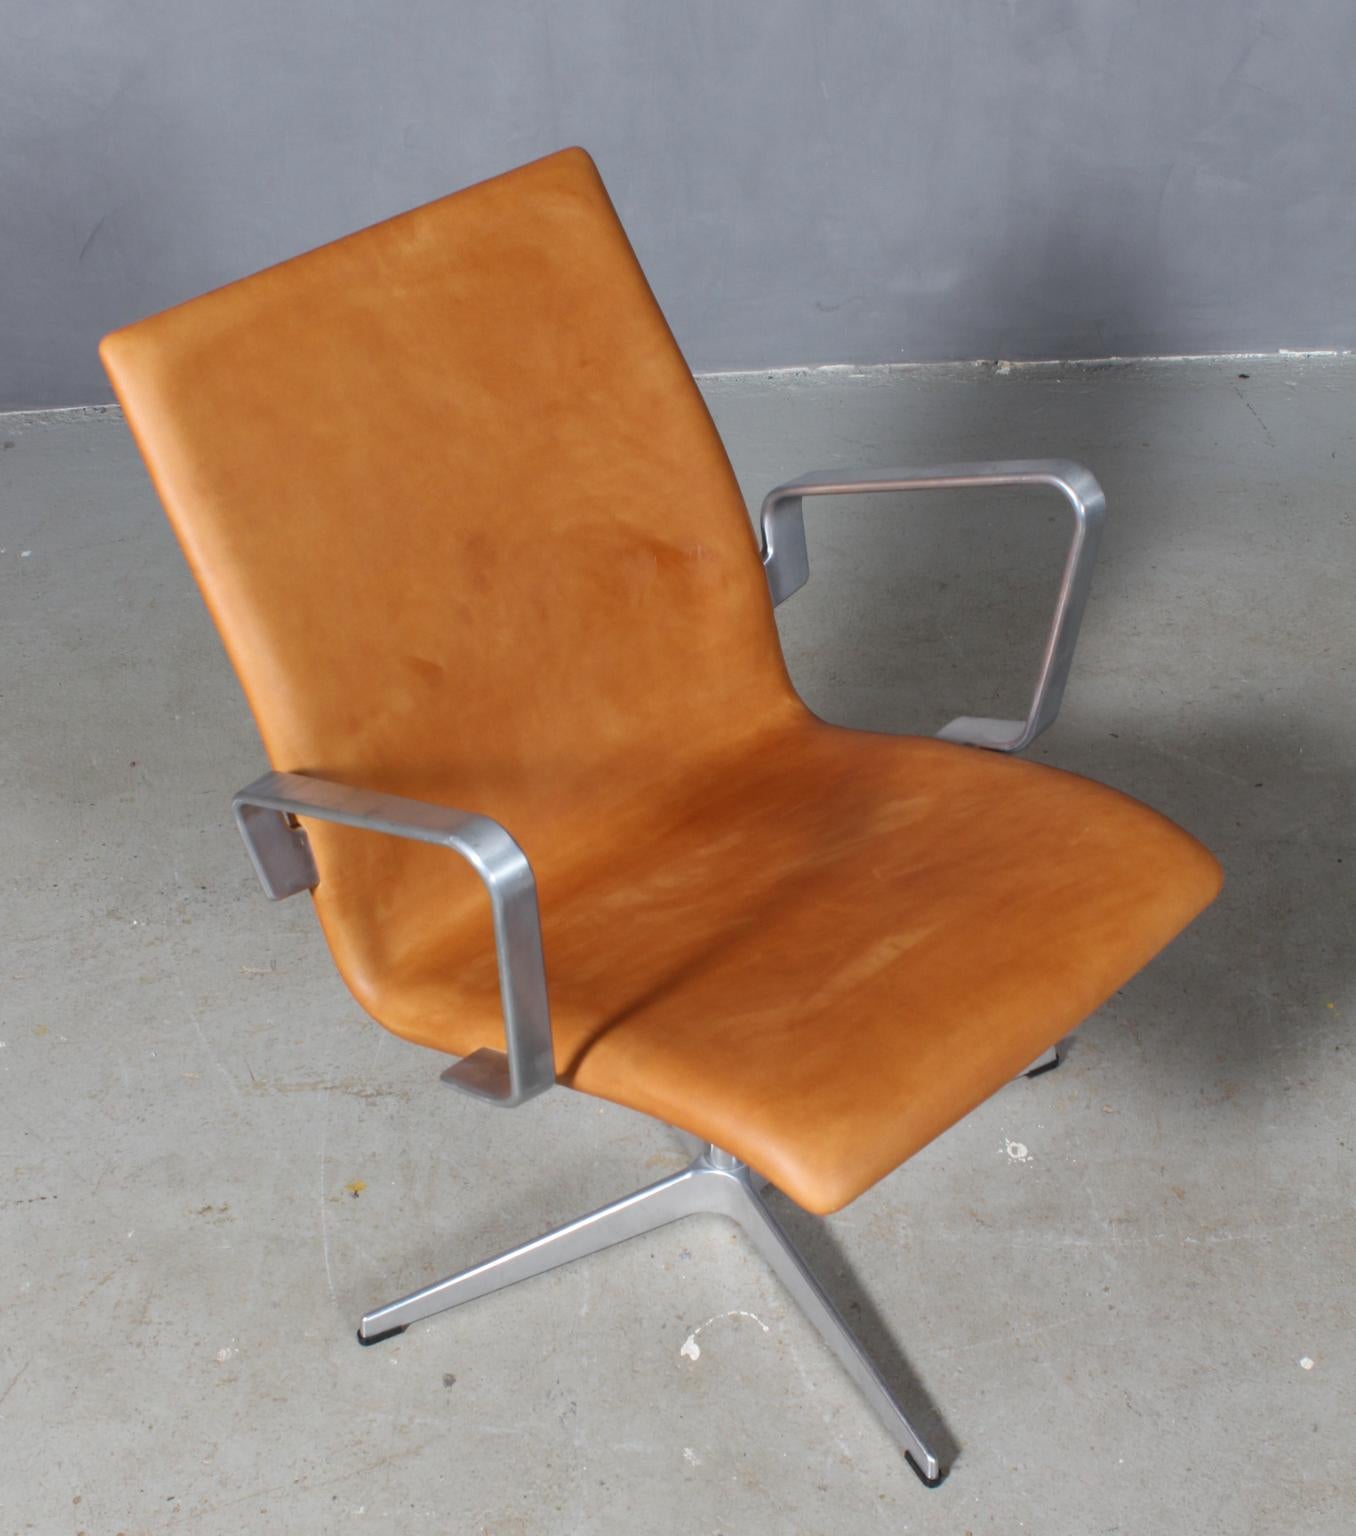 Arne Jacobsen Oxford chair four-star base in aluminum. Turn able, goes back to the start automatic.

New upholstered with vintage tan aniline leather. 

Made by Fritz Hansen.

Original designed for the Oxford university.